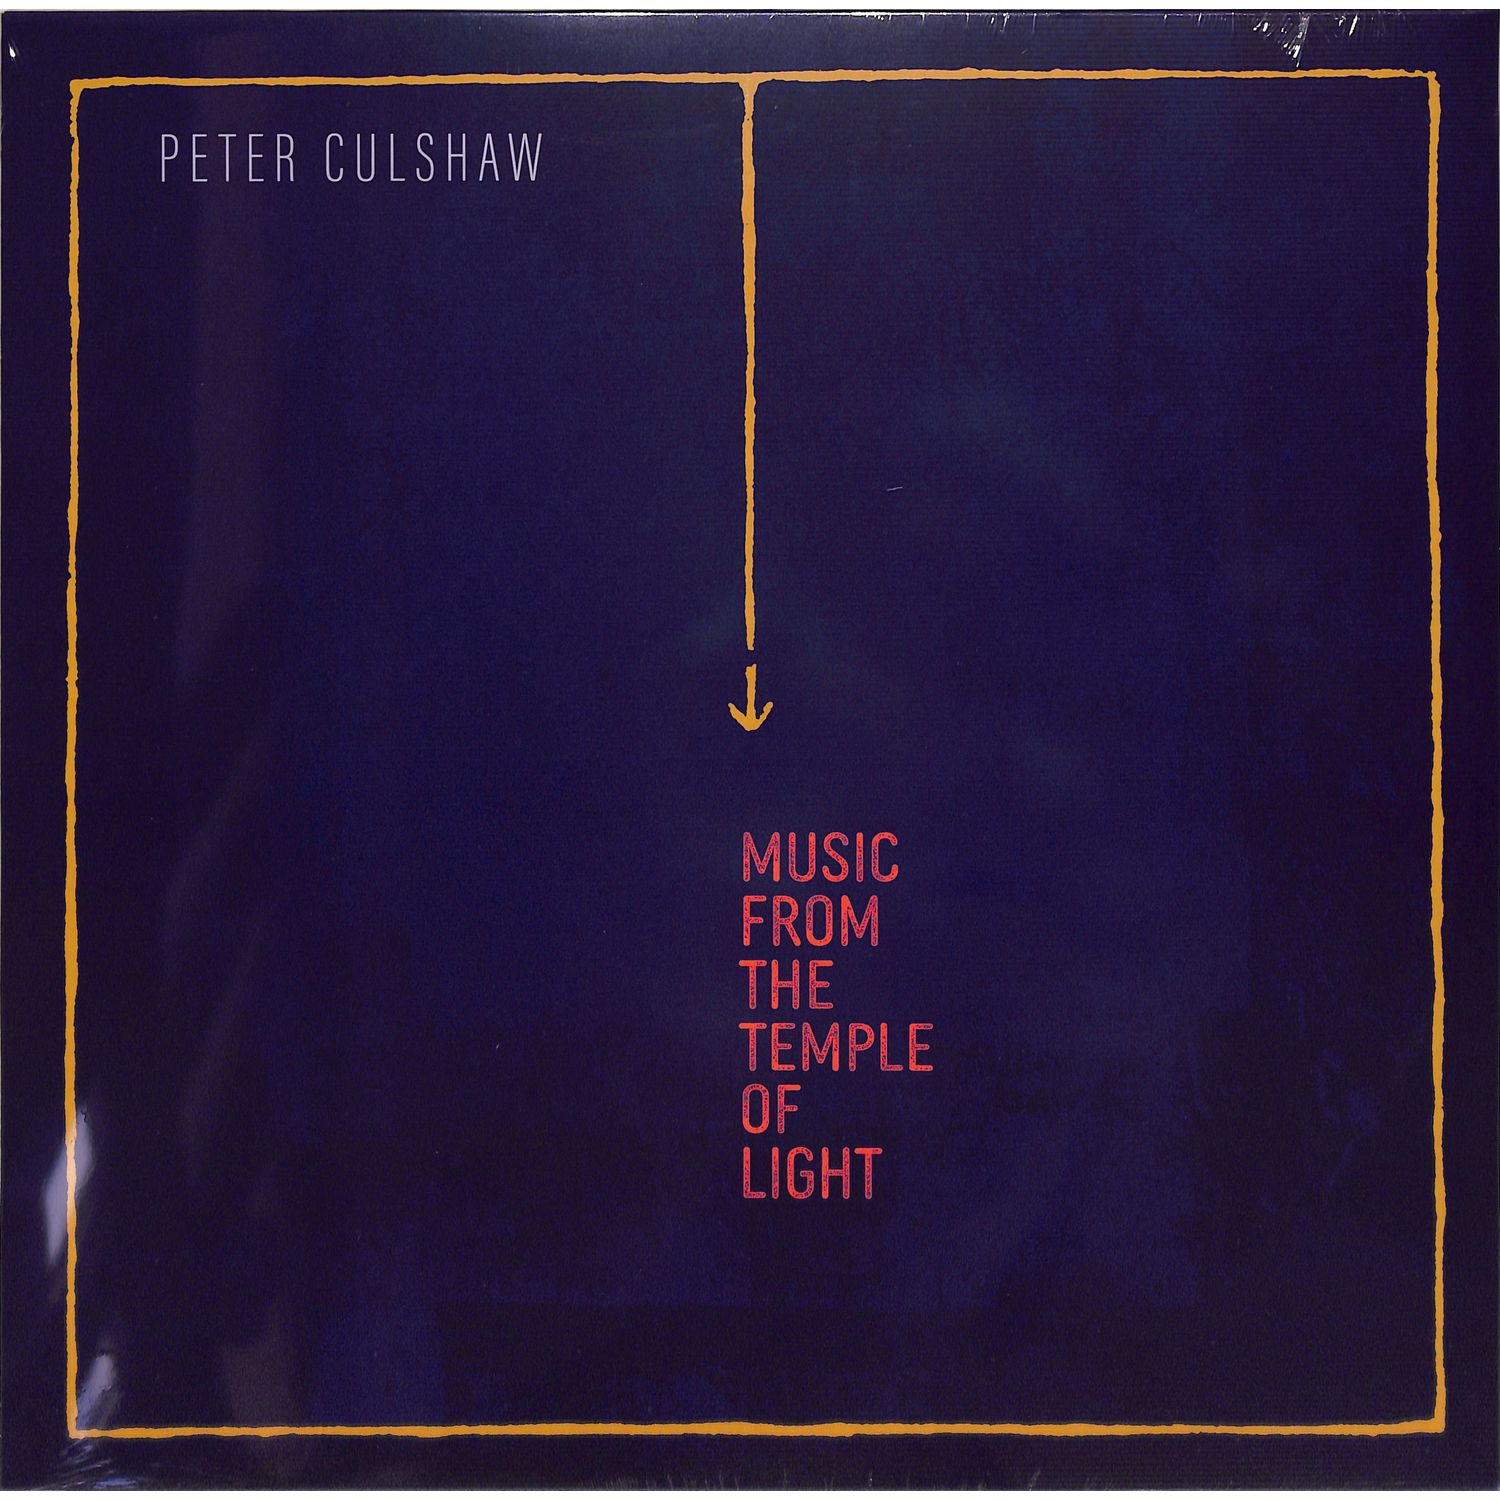 Peter Culshaw - MUSIC FROM THE TEMPLE OF LIGHT 